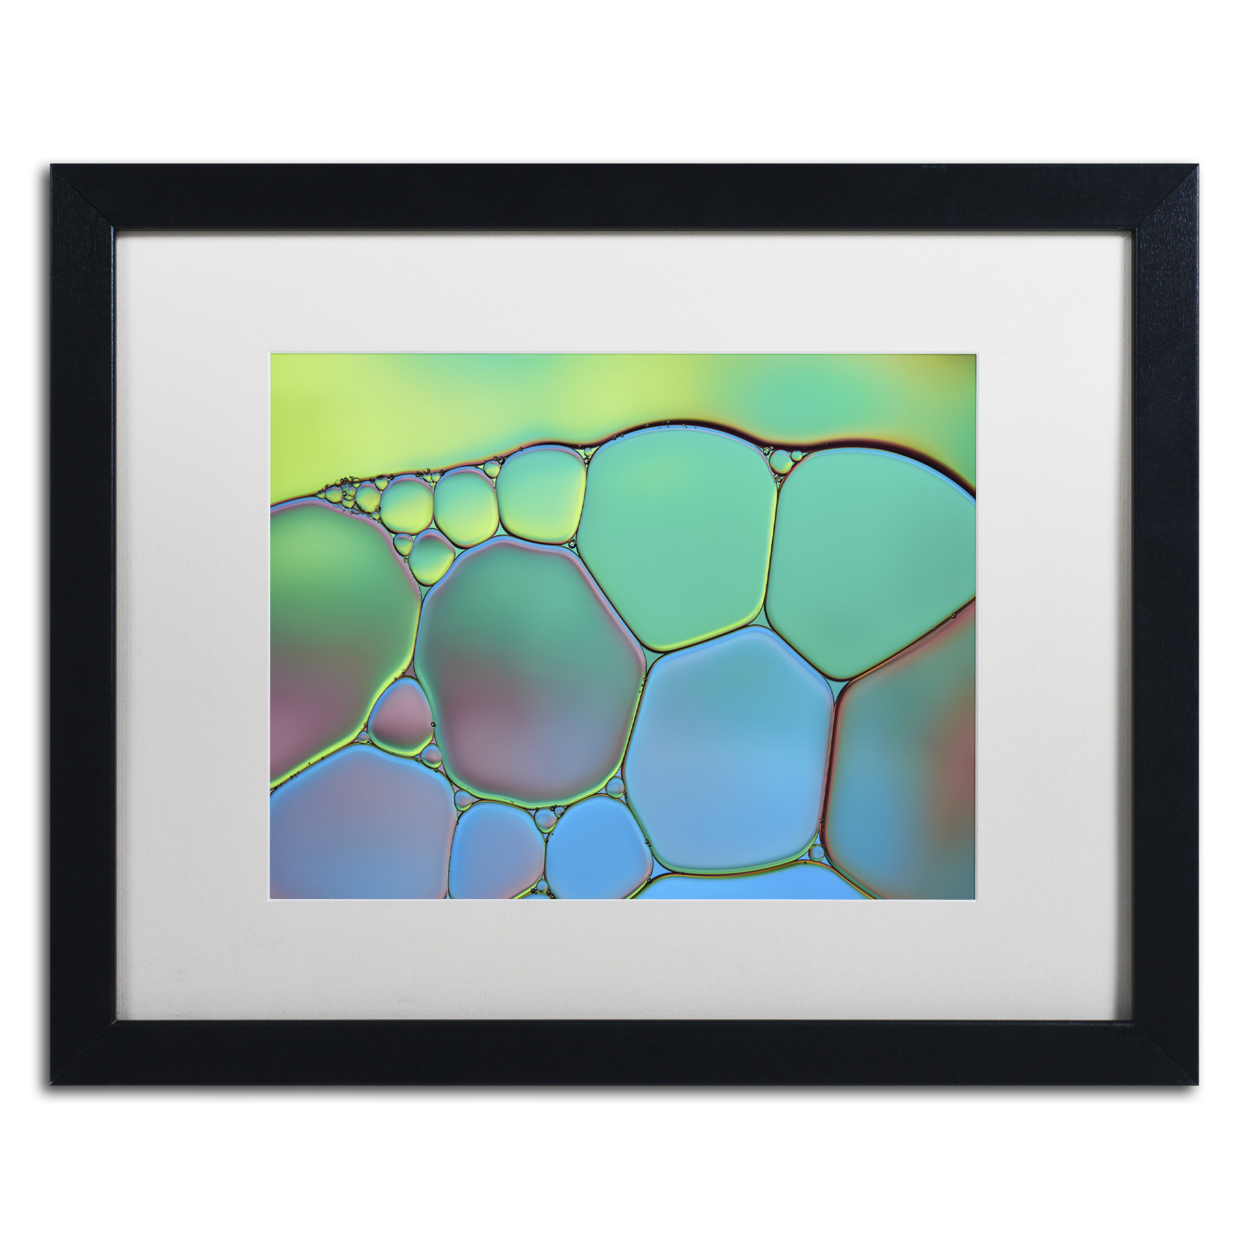 Cora Niele 'Lime Green And Blue Stained Glass' Black Wooden Framed Art 18 X 22 Inches